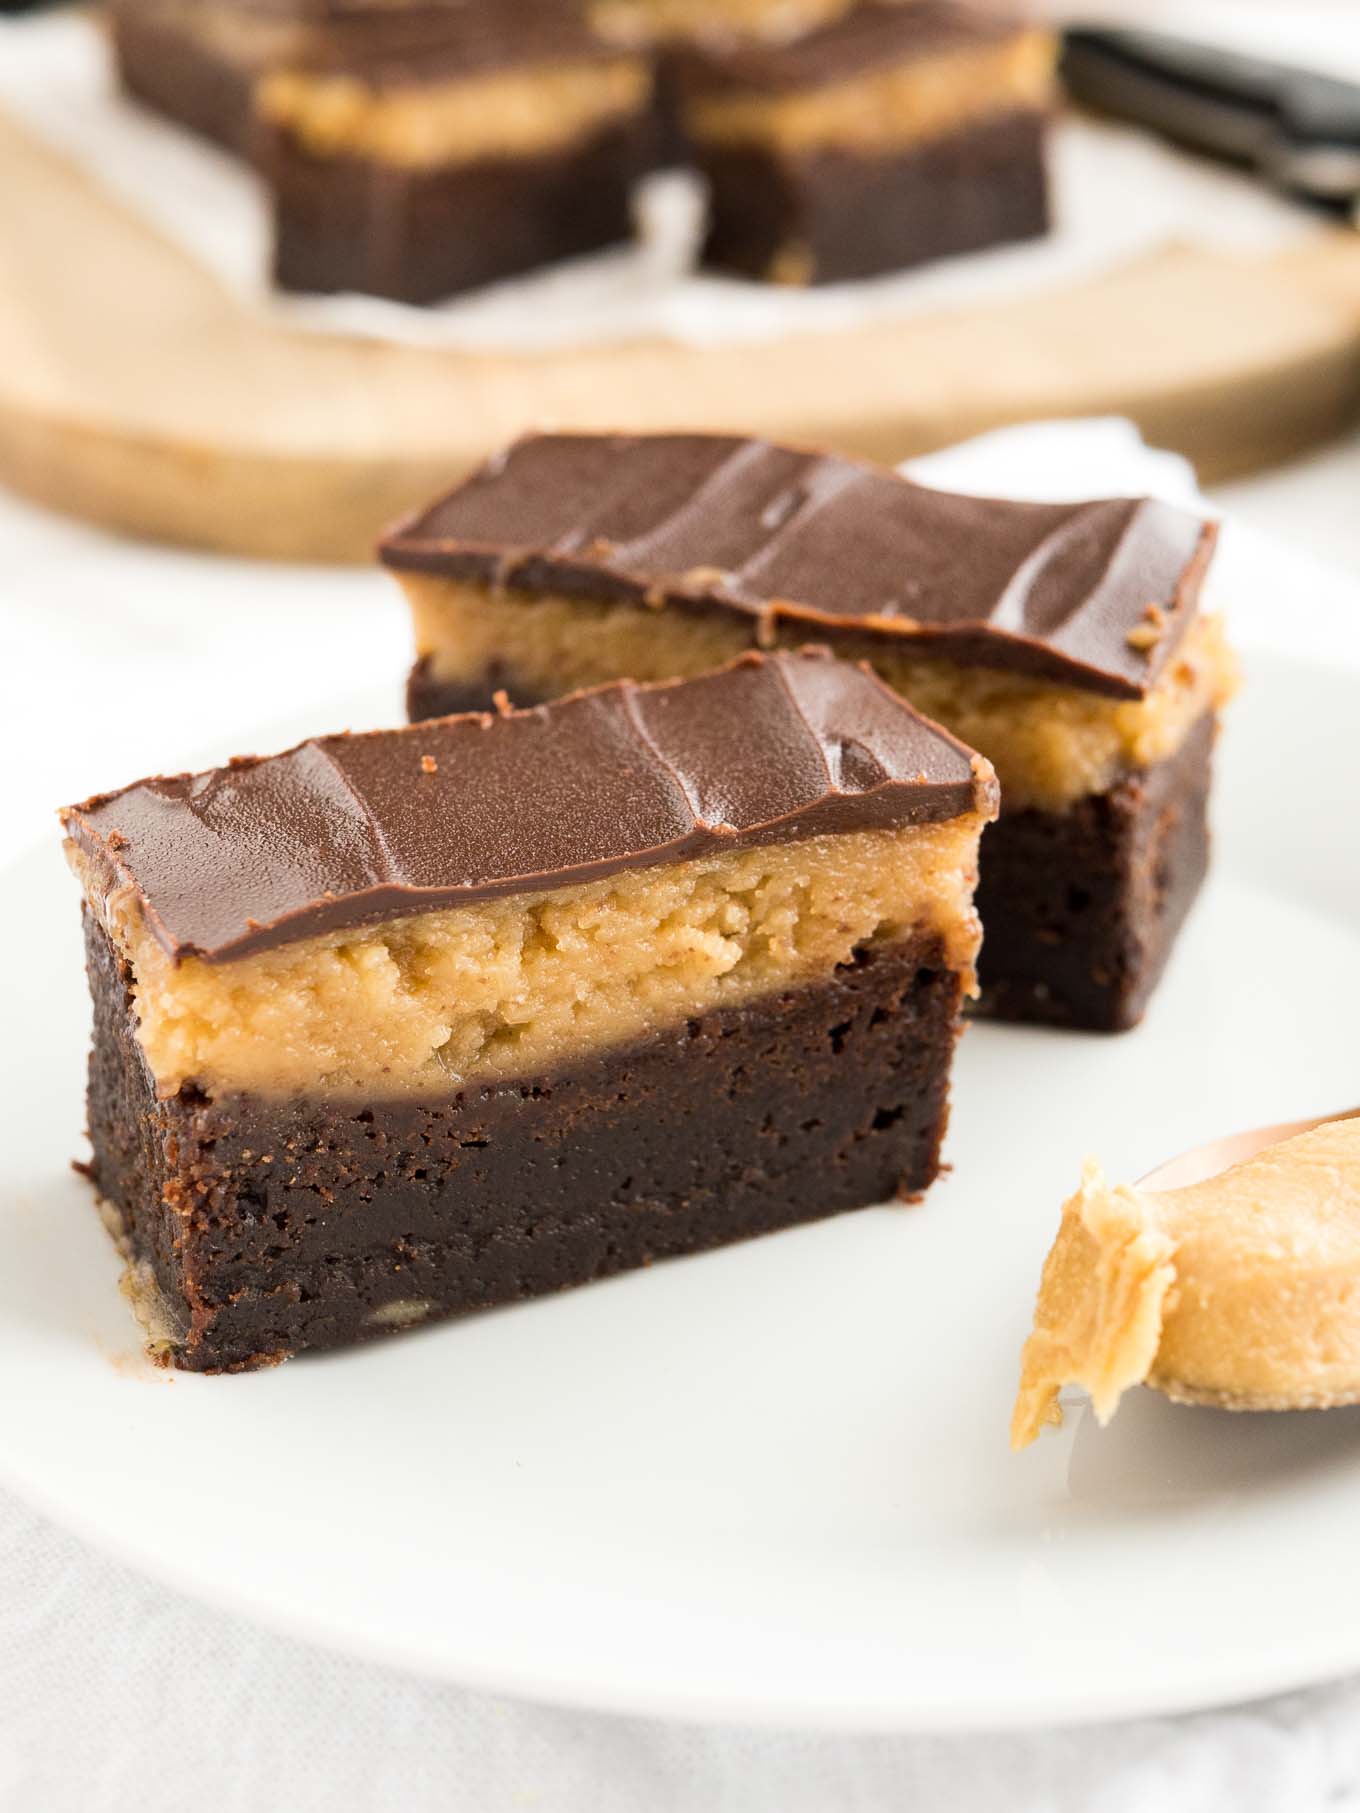 Peanut butter brownie bars on a white plate with a bronze spoon of peanut butter. A wooden cutting board with more bars is in the background.